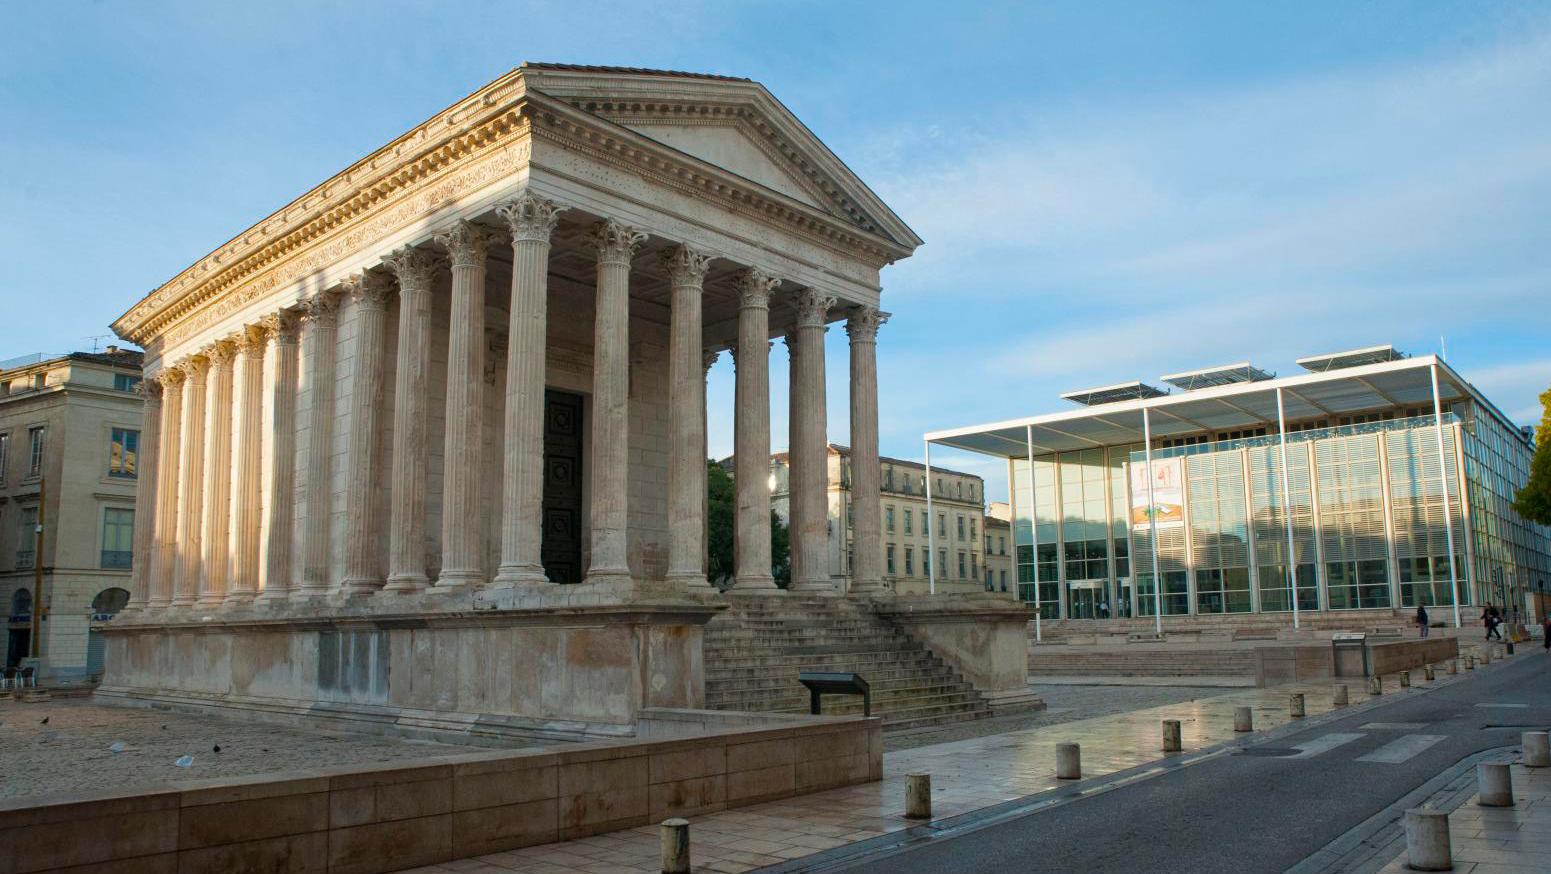 Norman Foster’s nine-story glass, steel and concrete building is named for its proximity... The Carré d’art in Nîmes Turns Thirty